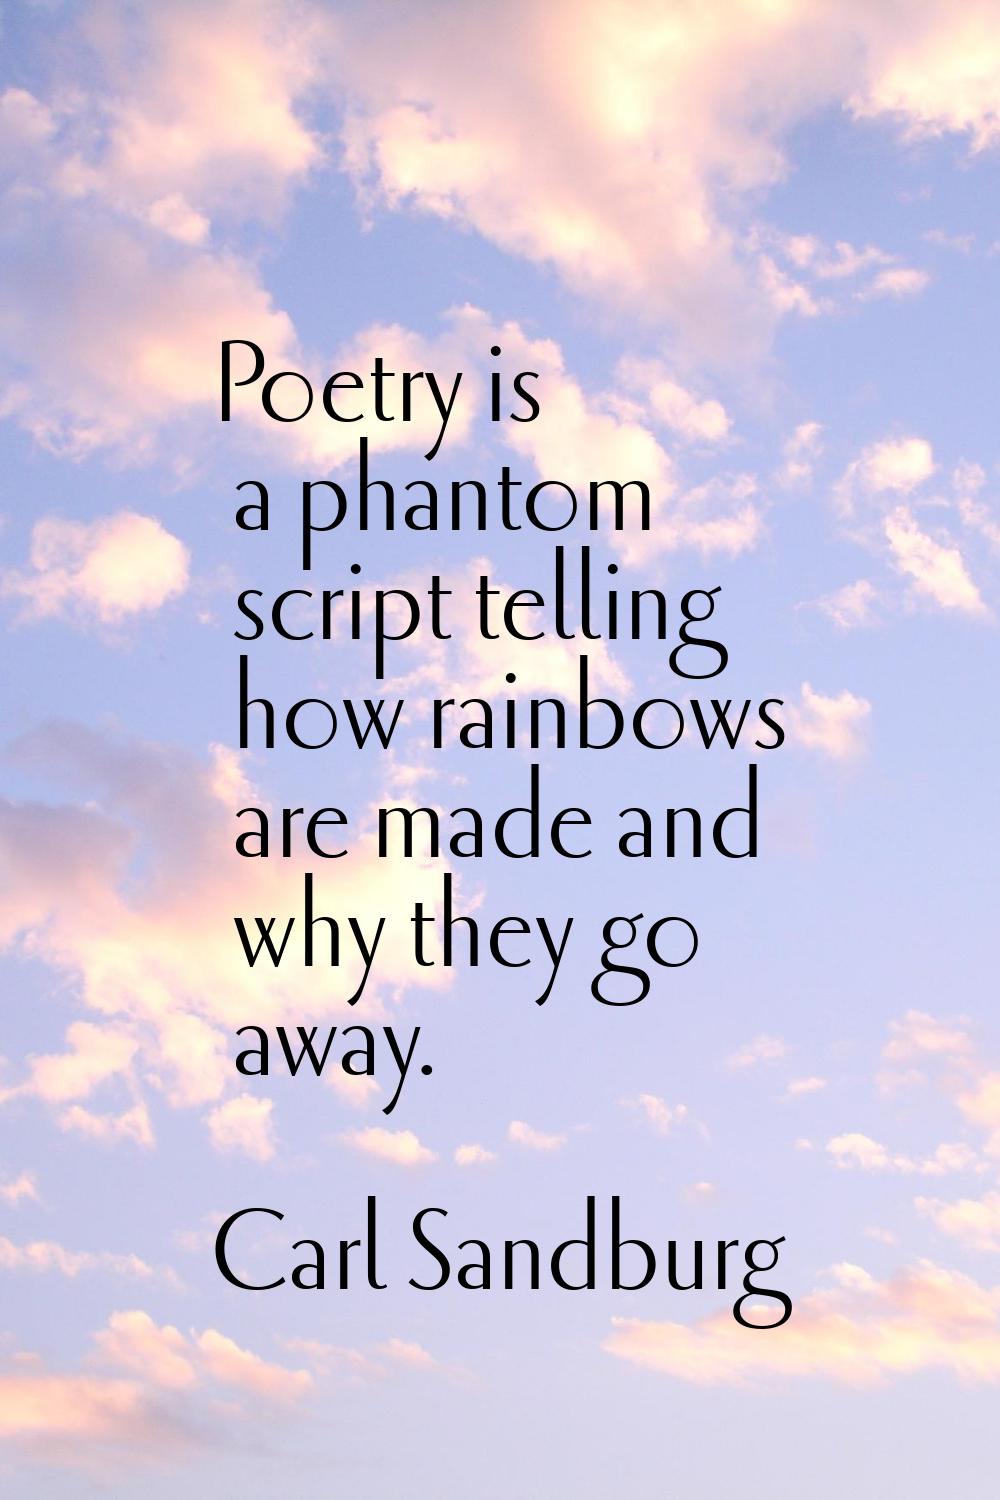 Poetry is a phantom script telling how rainbows are made and why they go away.